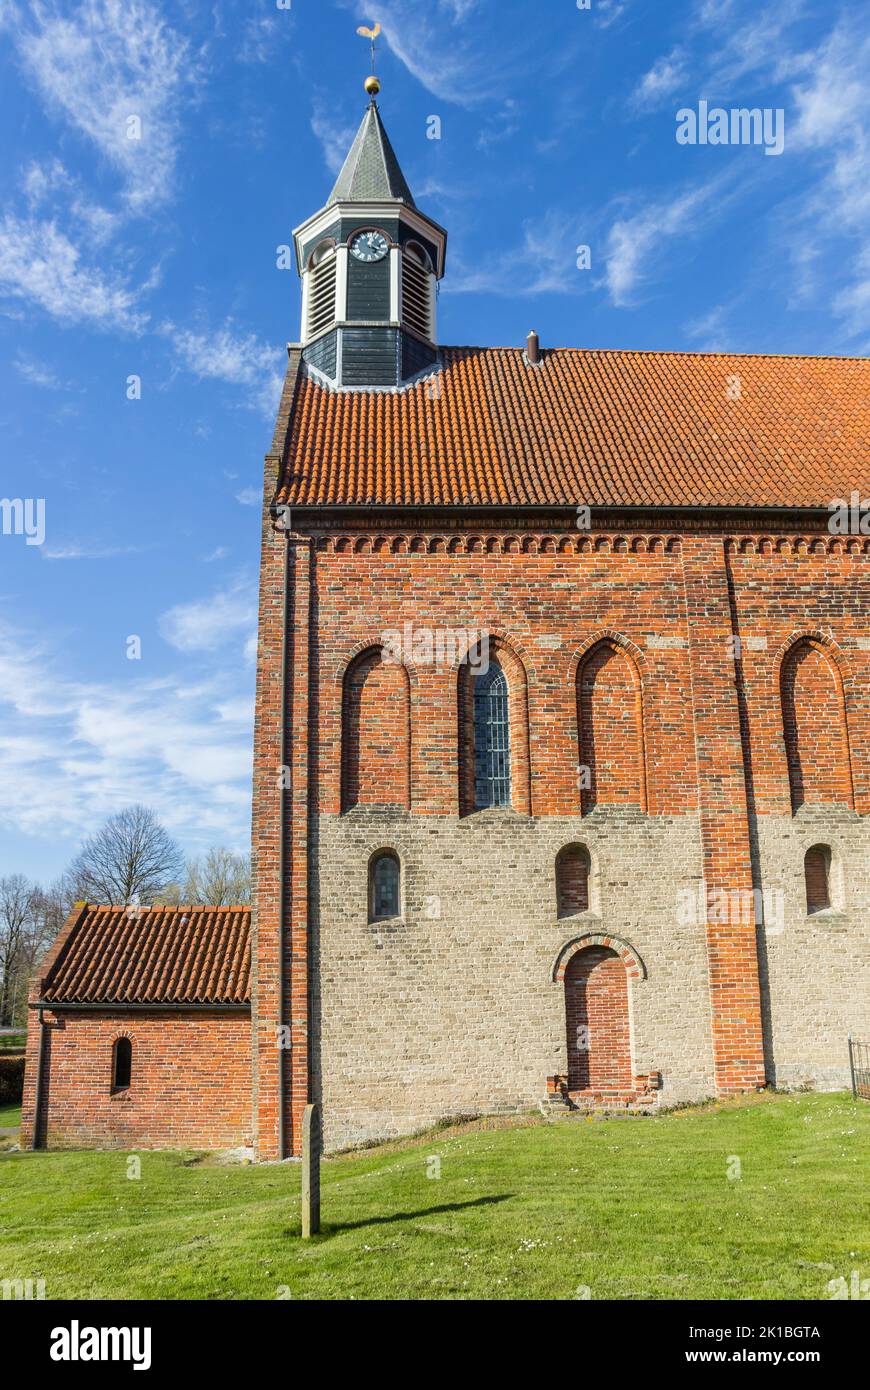 Side view of the historic Stefanus church in Holwierde, Netherlands Stock Photo